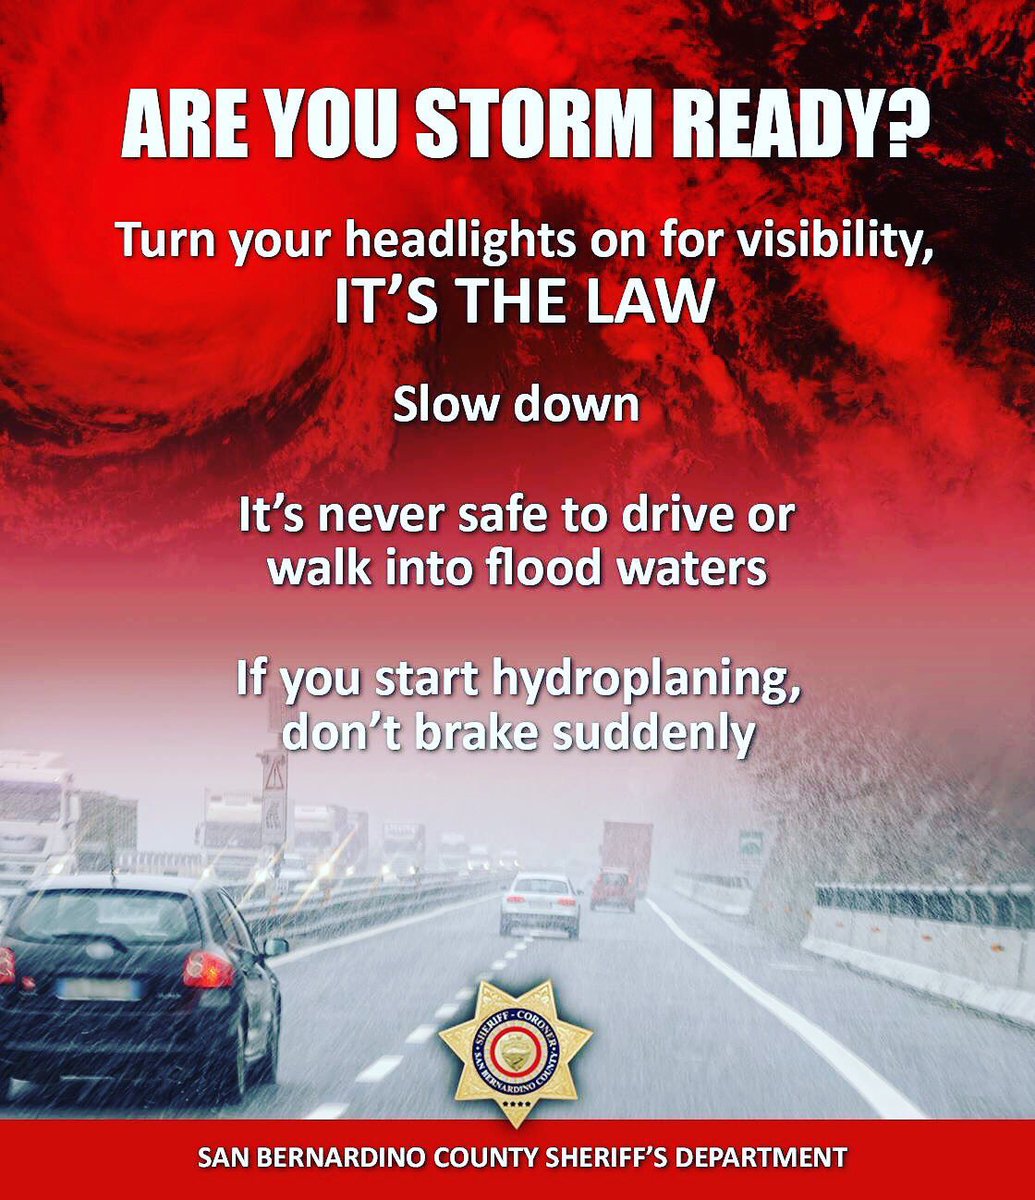 Just as a reminder the Evacuation Warning remains in effect due to the current storm. Be storm-ready, take extra precautions, and follow your local first responders' social media accounts for more information @SBCOUNTYFIRE @Caltrans8